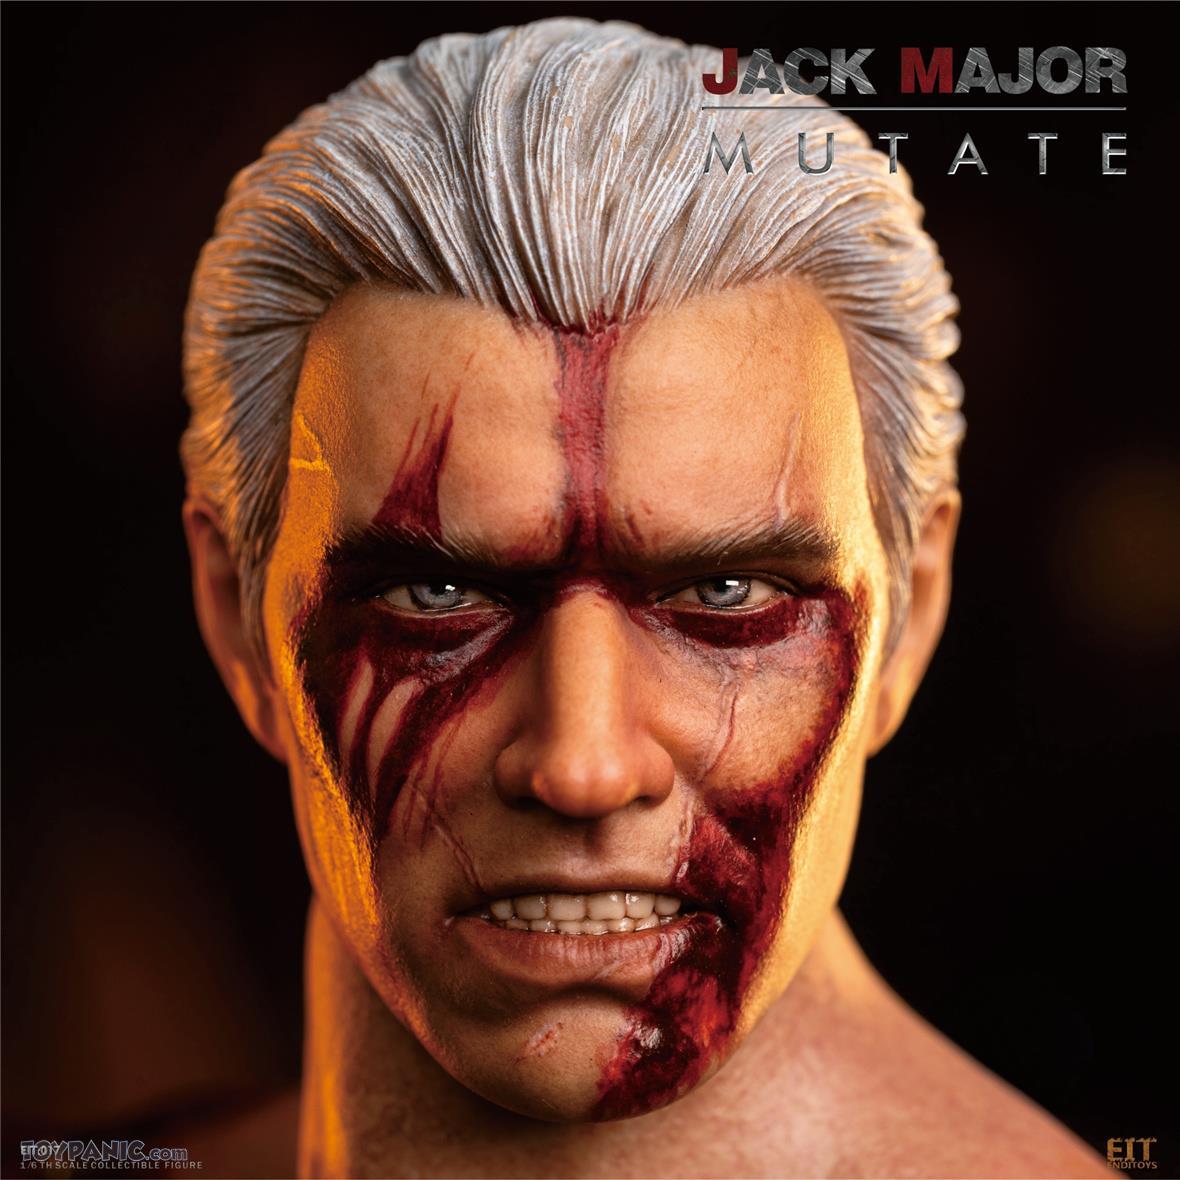 residentevil - NEW PRODUCT:  1/6 Jack Major Mutate from End I Toys  2732024105953AM_5878206